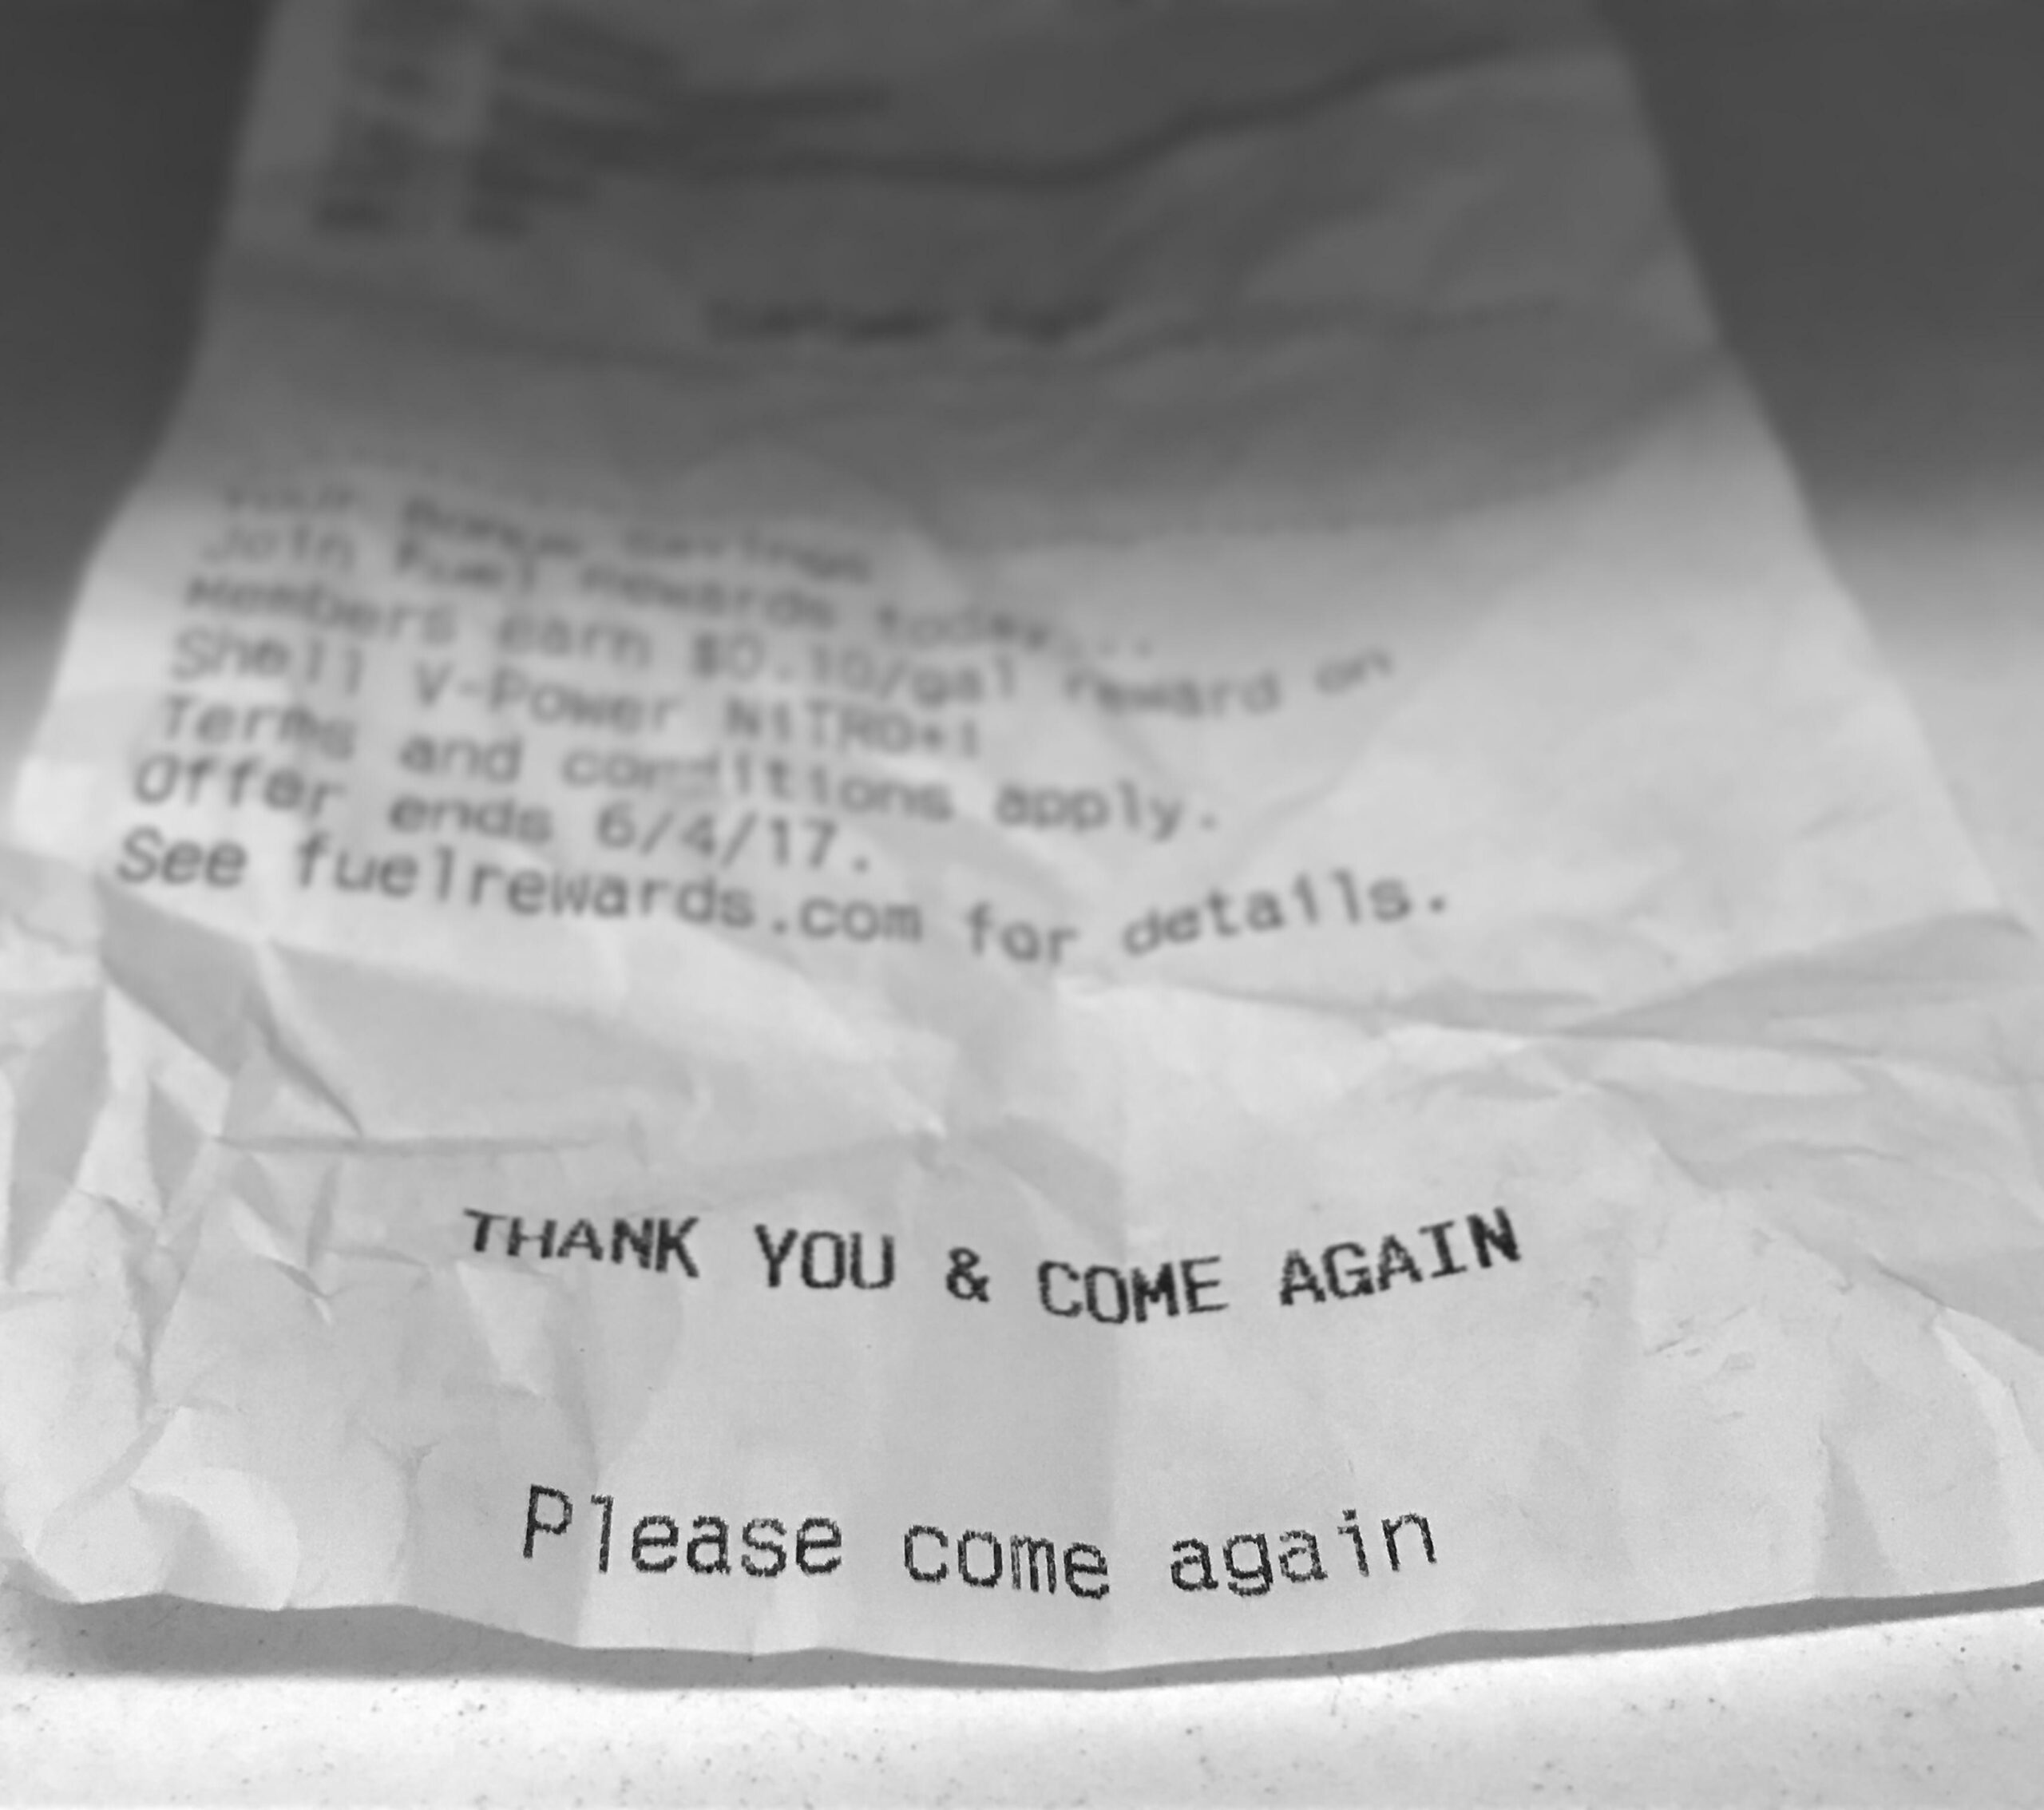 Receipt that says "Thank you and come again." then "please come again." underneath